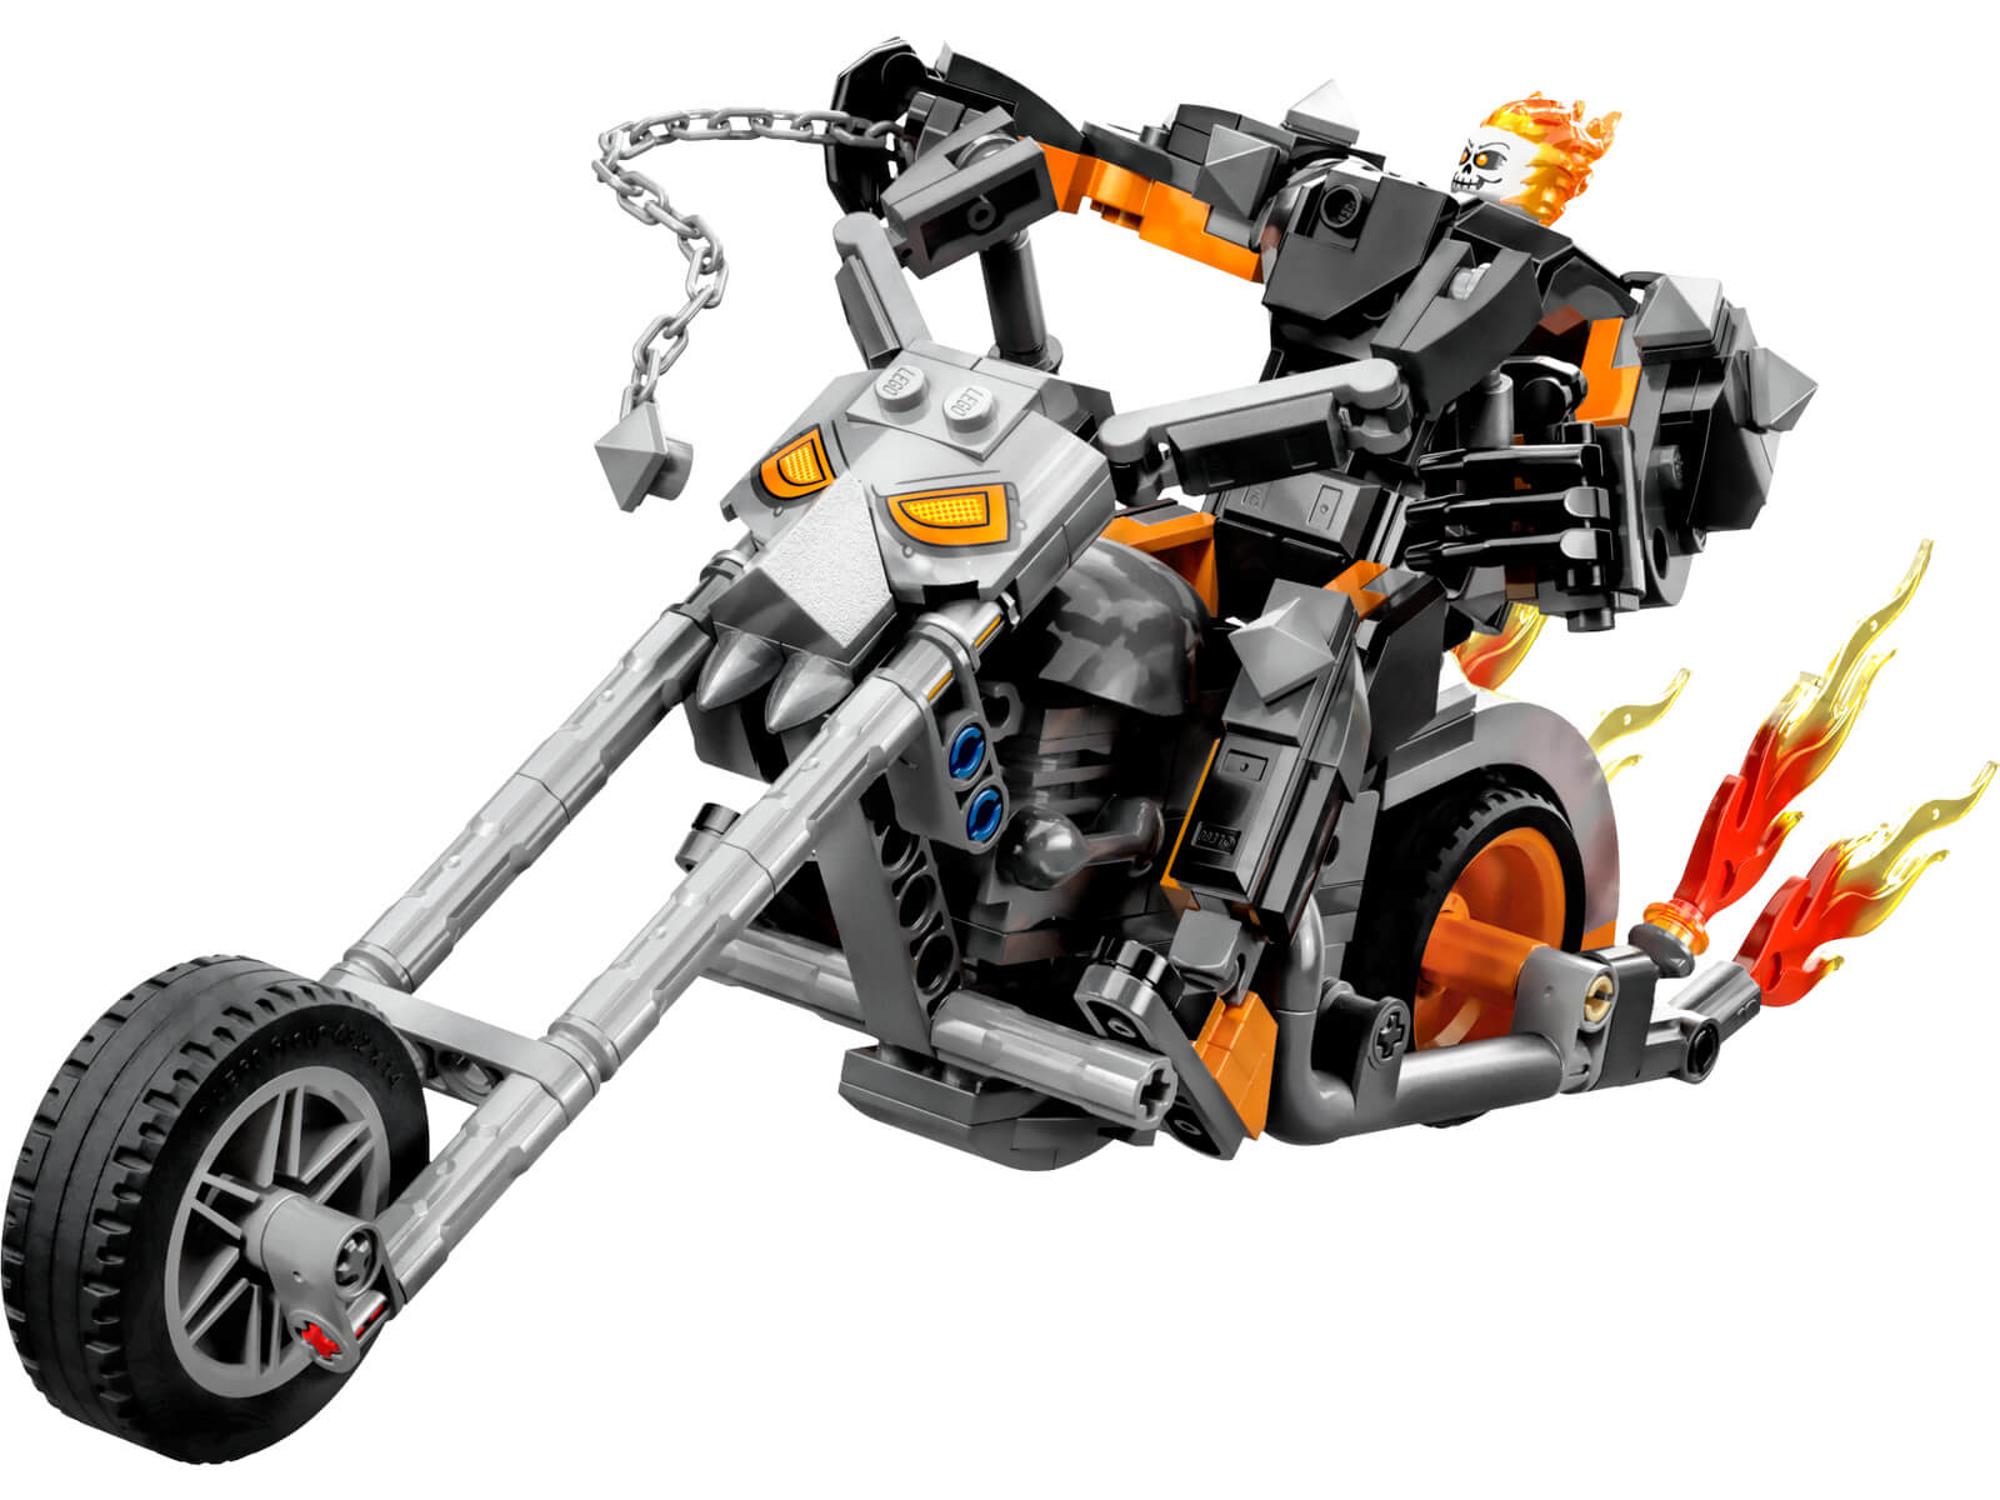 LEGO Marvel - Ghost Rider Mech and Bike